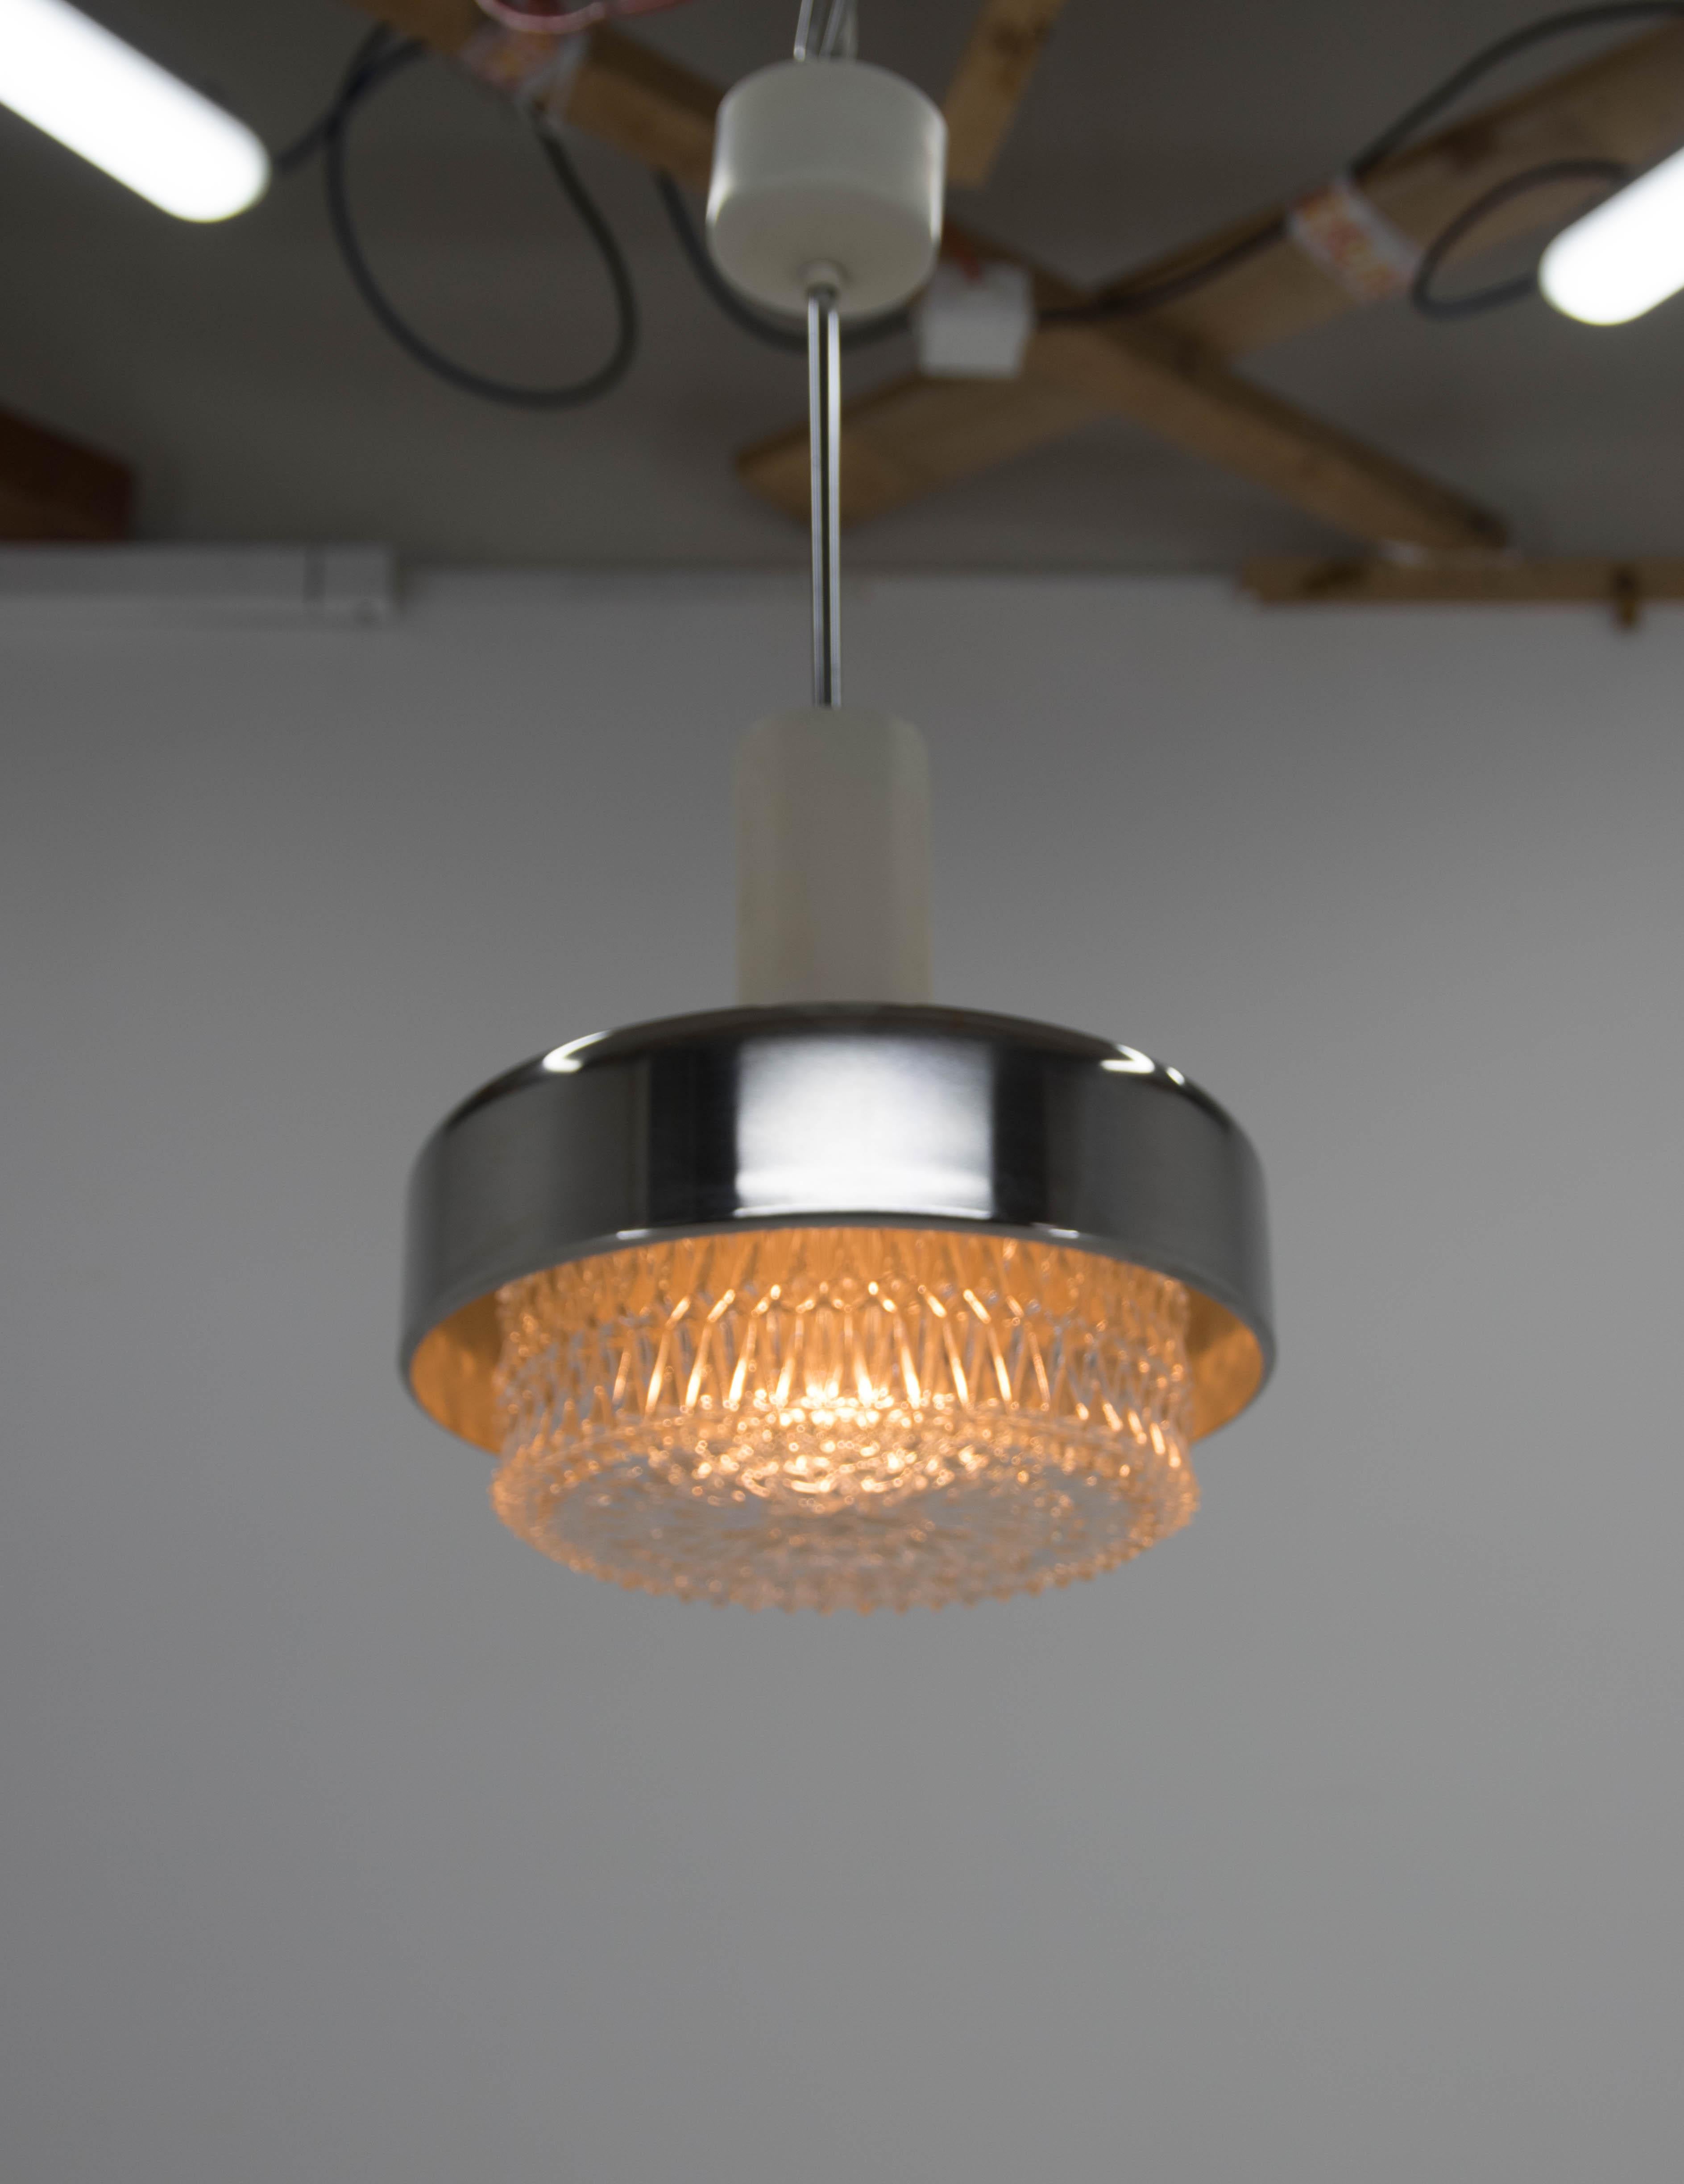 Steel and glass pendant by Napako. Very good original condition. rewired:
1x60W, E25-E27 bulb
US wiring compatible.